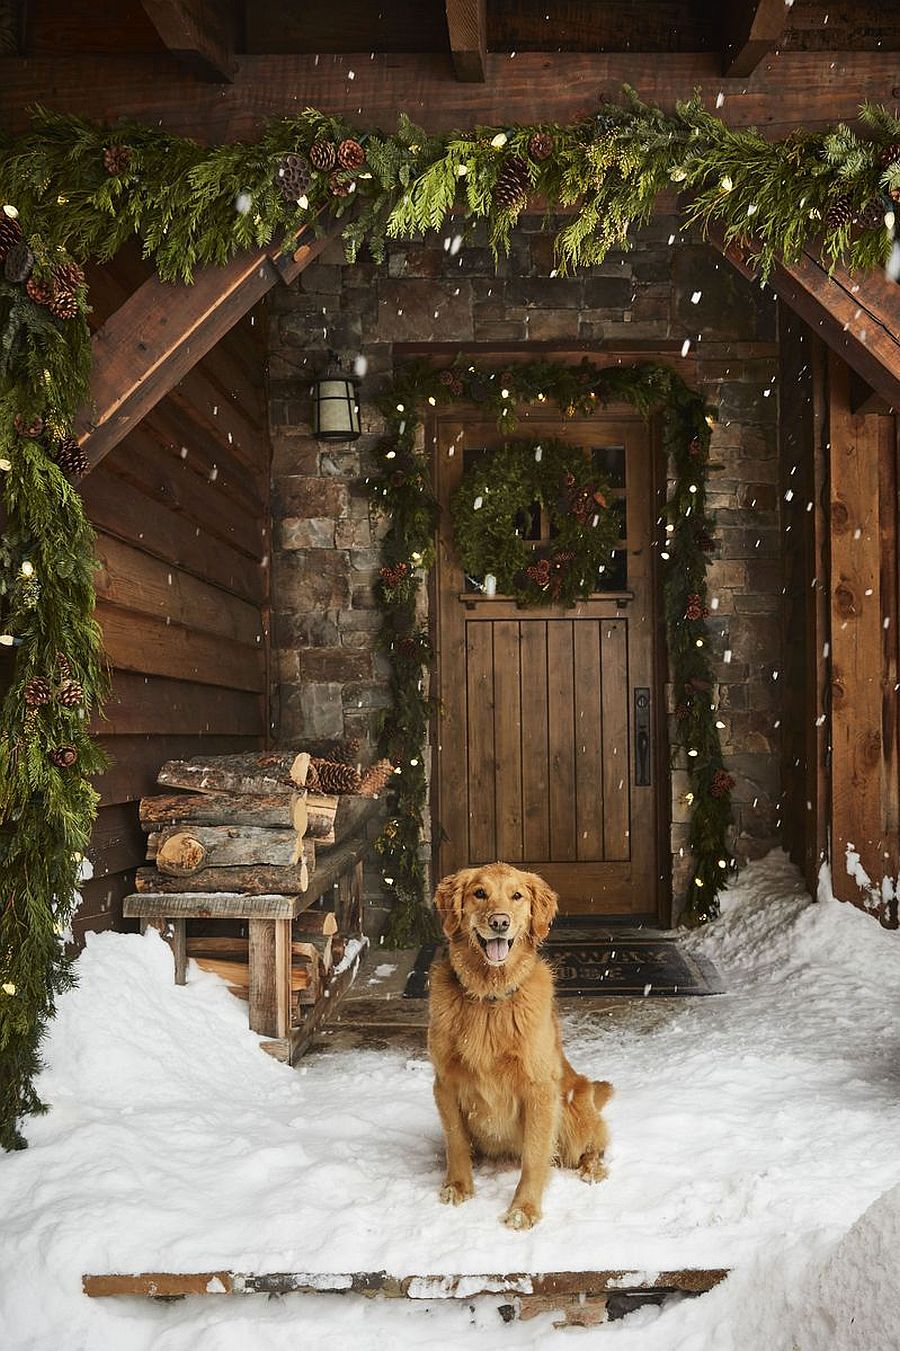 It-is-garlands-and-wreaths-that-bring-Chrsitmas-magic-to-this-snow-clad-home